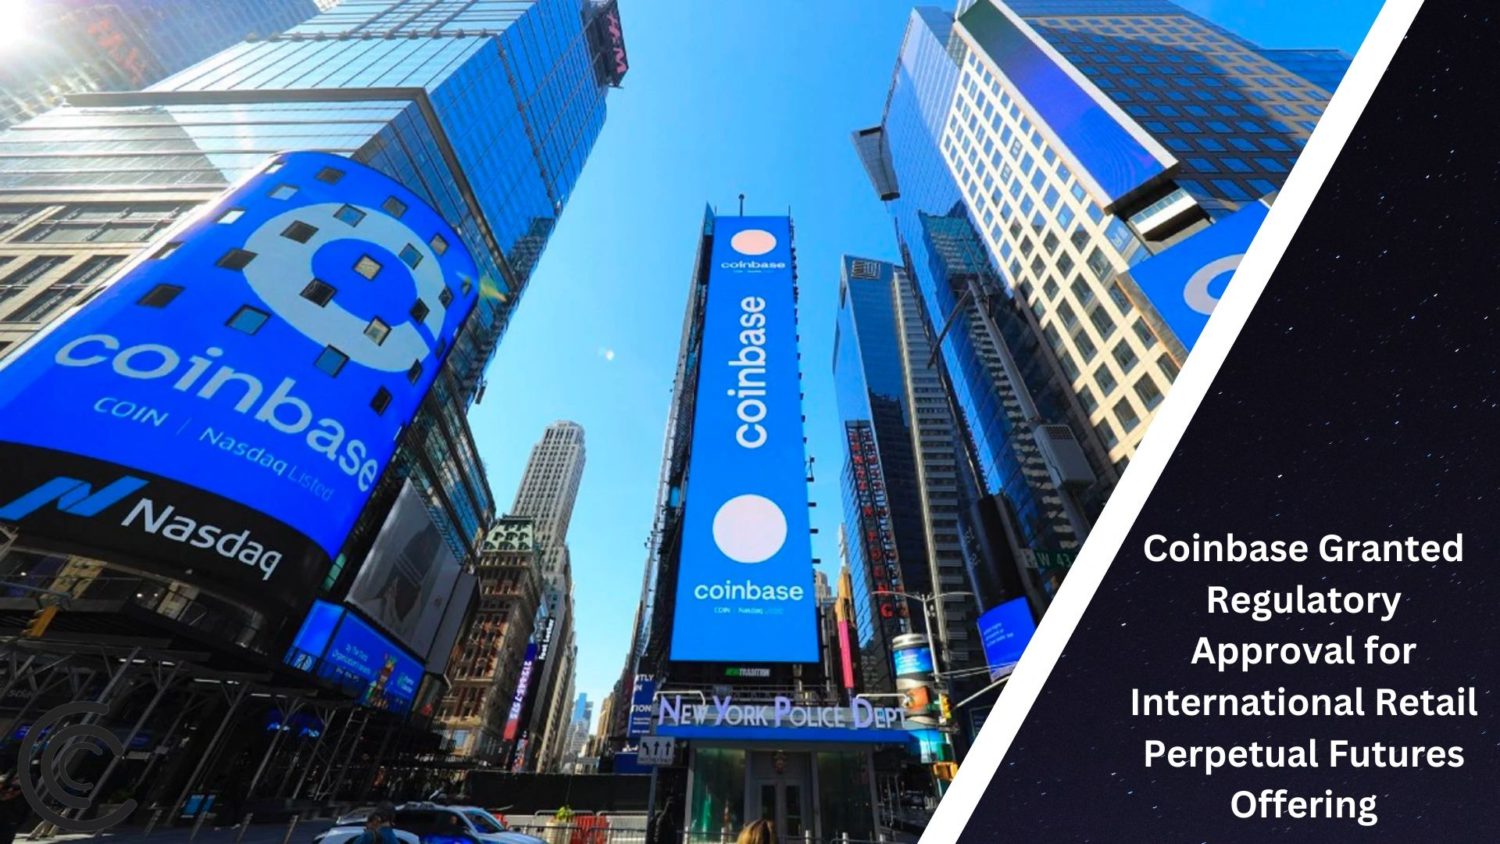 Coinbase Granted Regulatory Approval For International Retail Perpetual Futures Offering